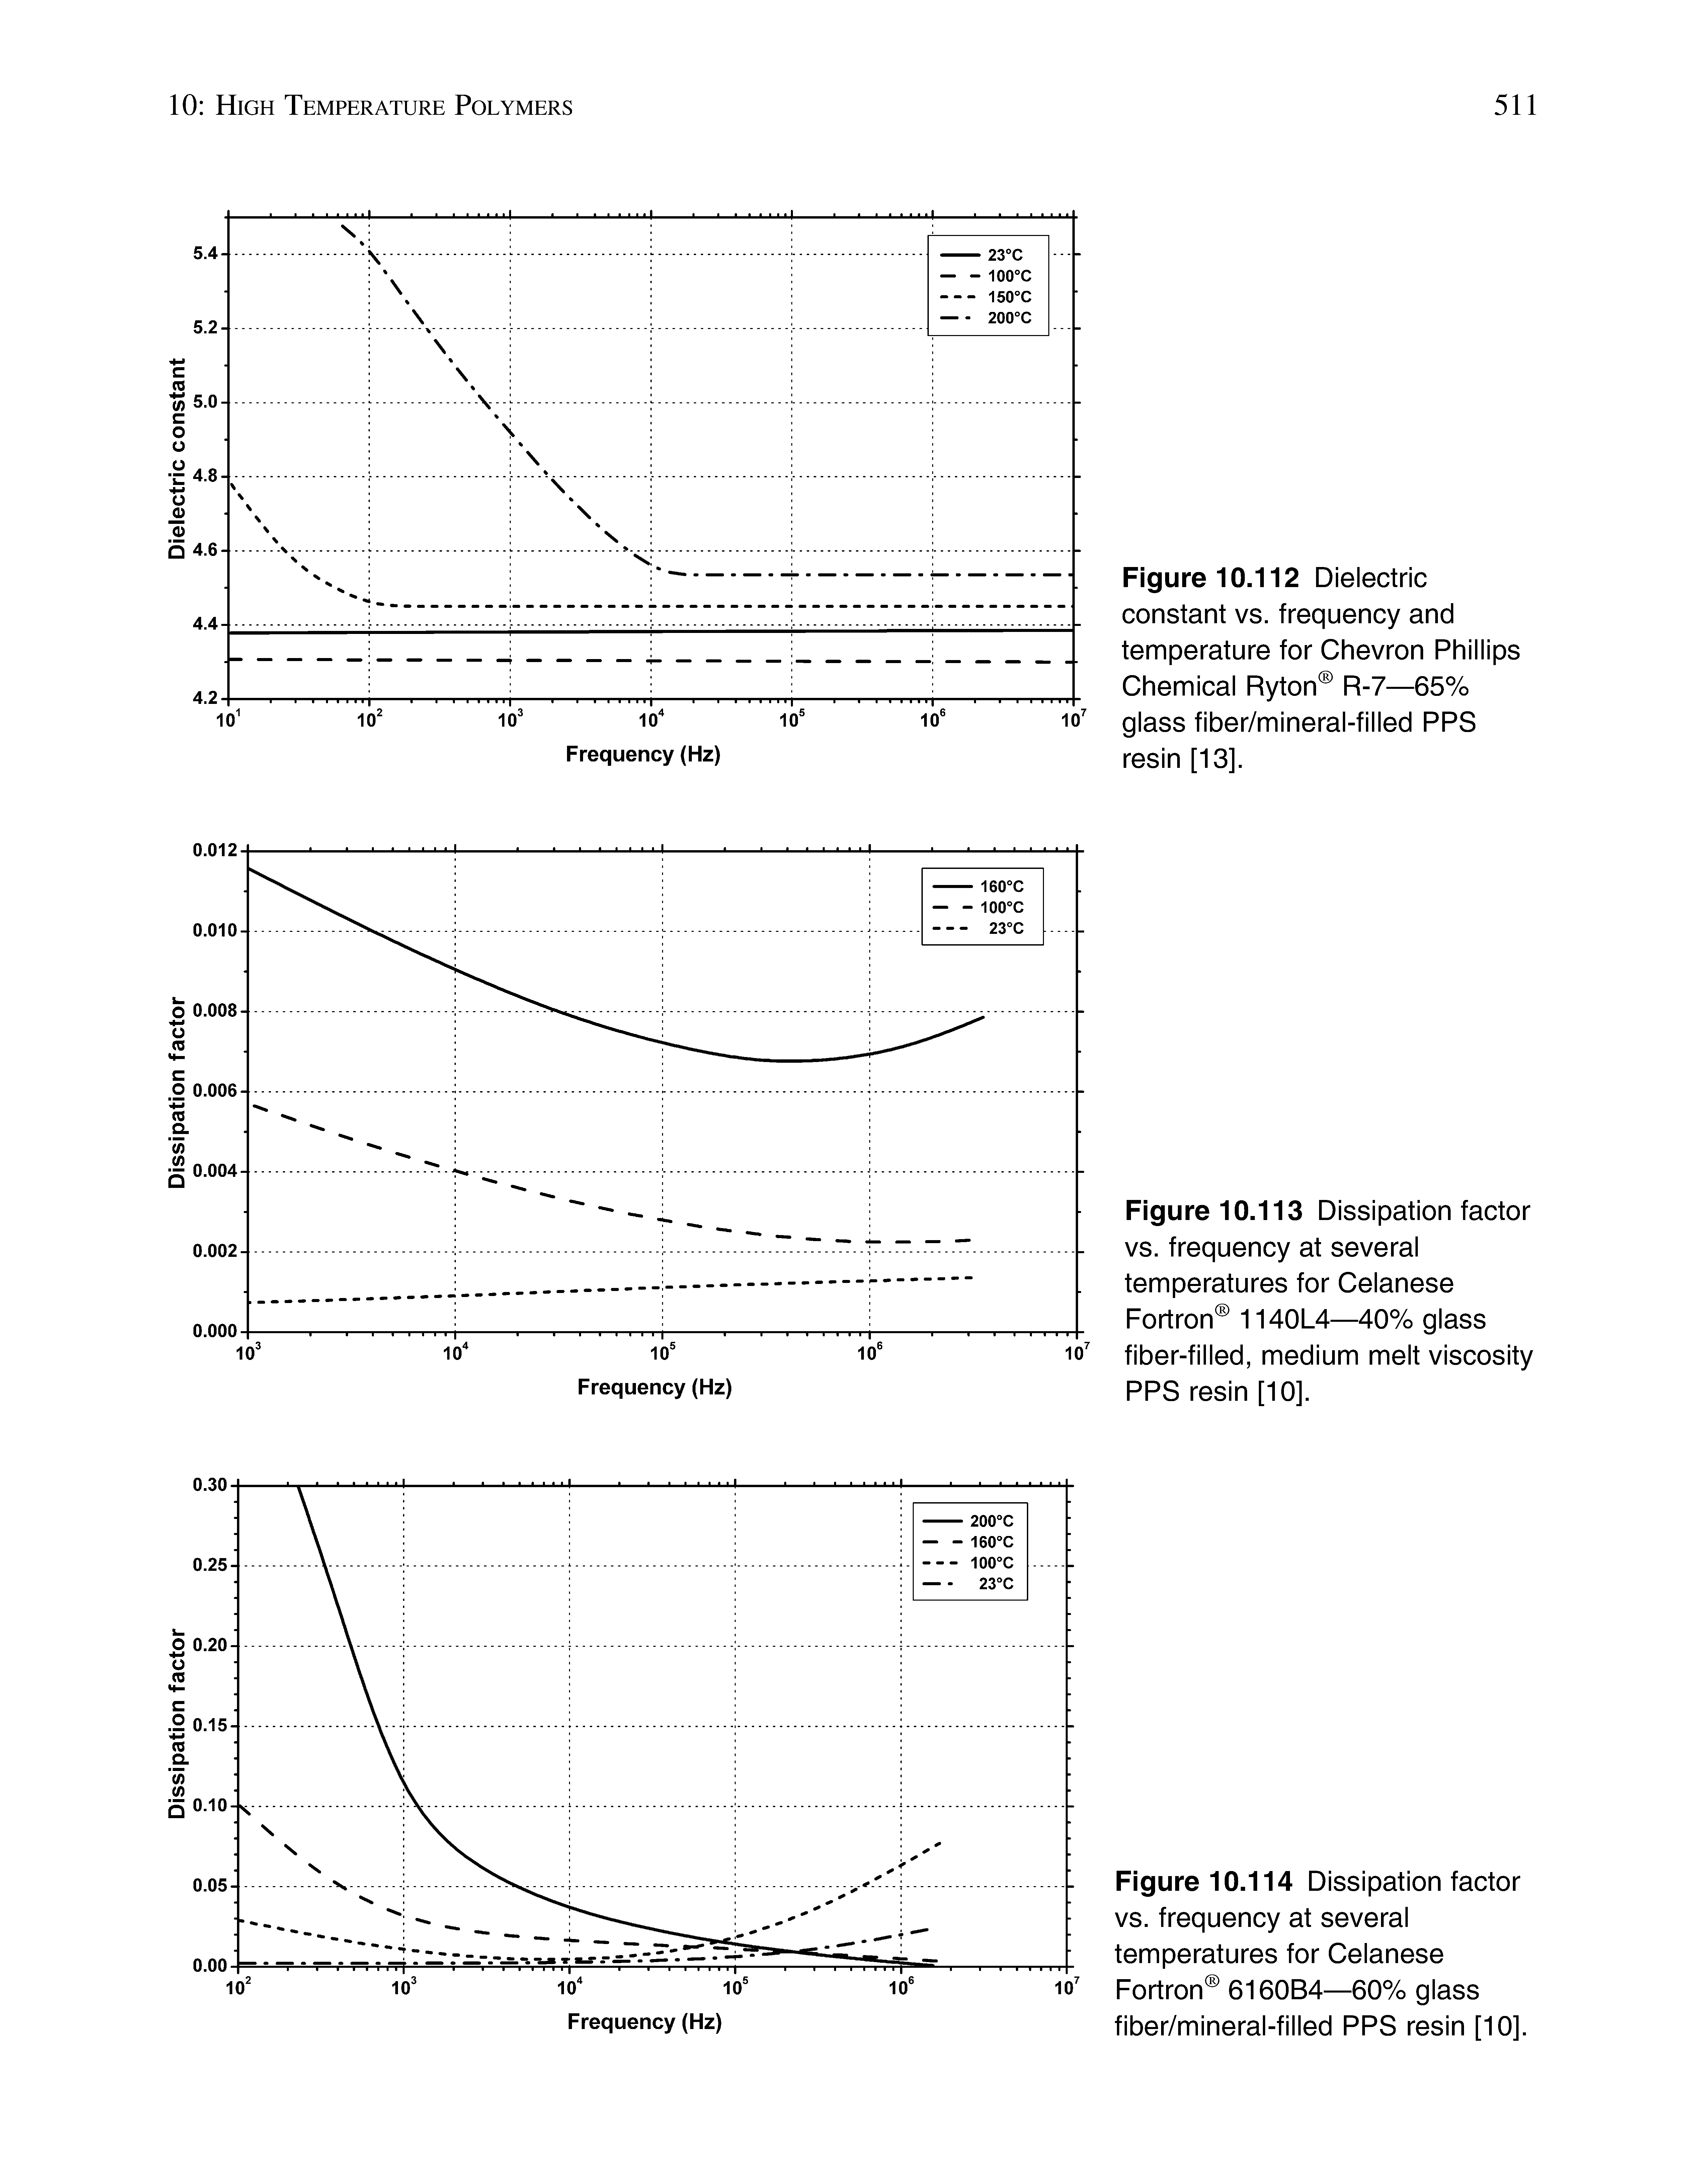 Figure 10.114 Dissipation factor vs. frequency at several temperatures for Celanese Fortron 616064—60% glass fiber/mineral-filled PPS resin [10].